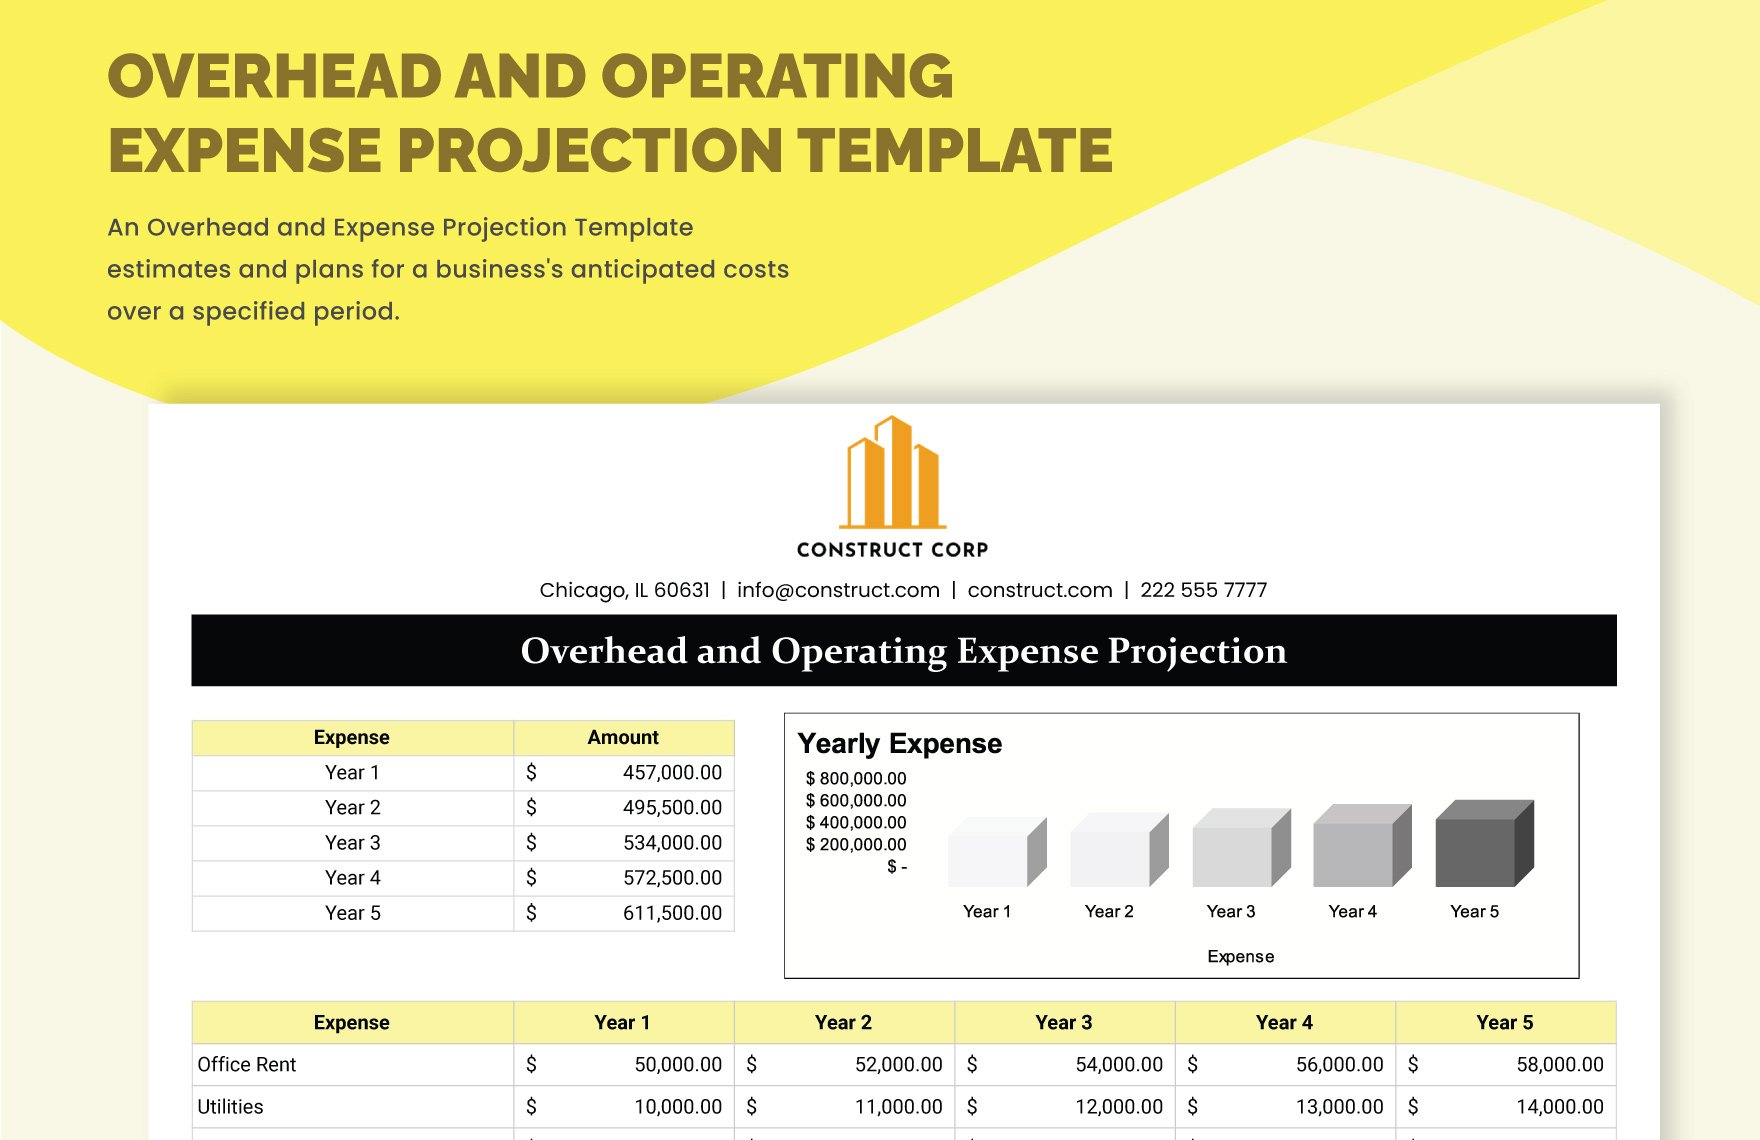 Overhead and Operating Expense Projection Template